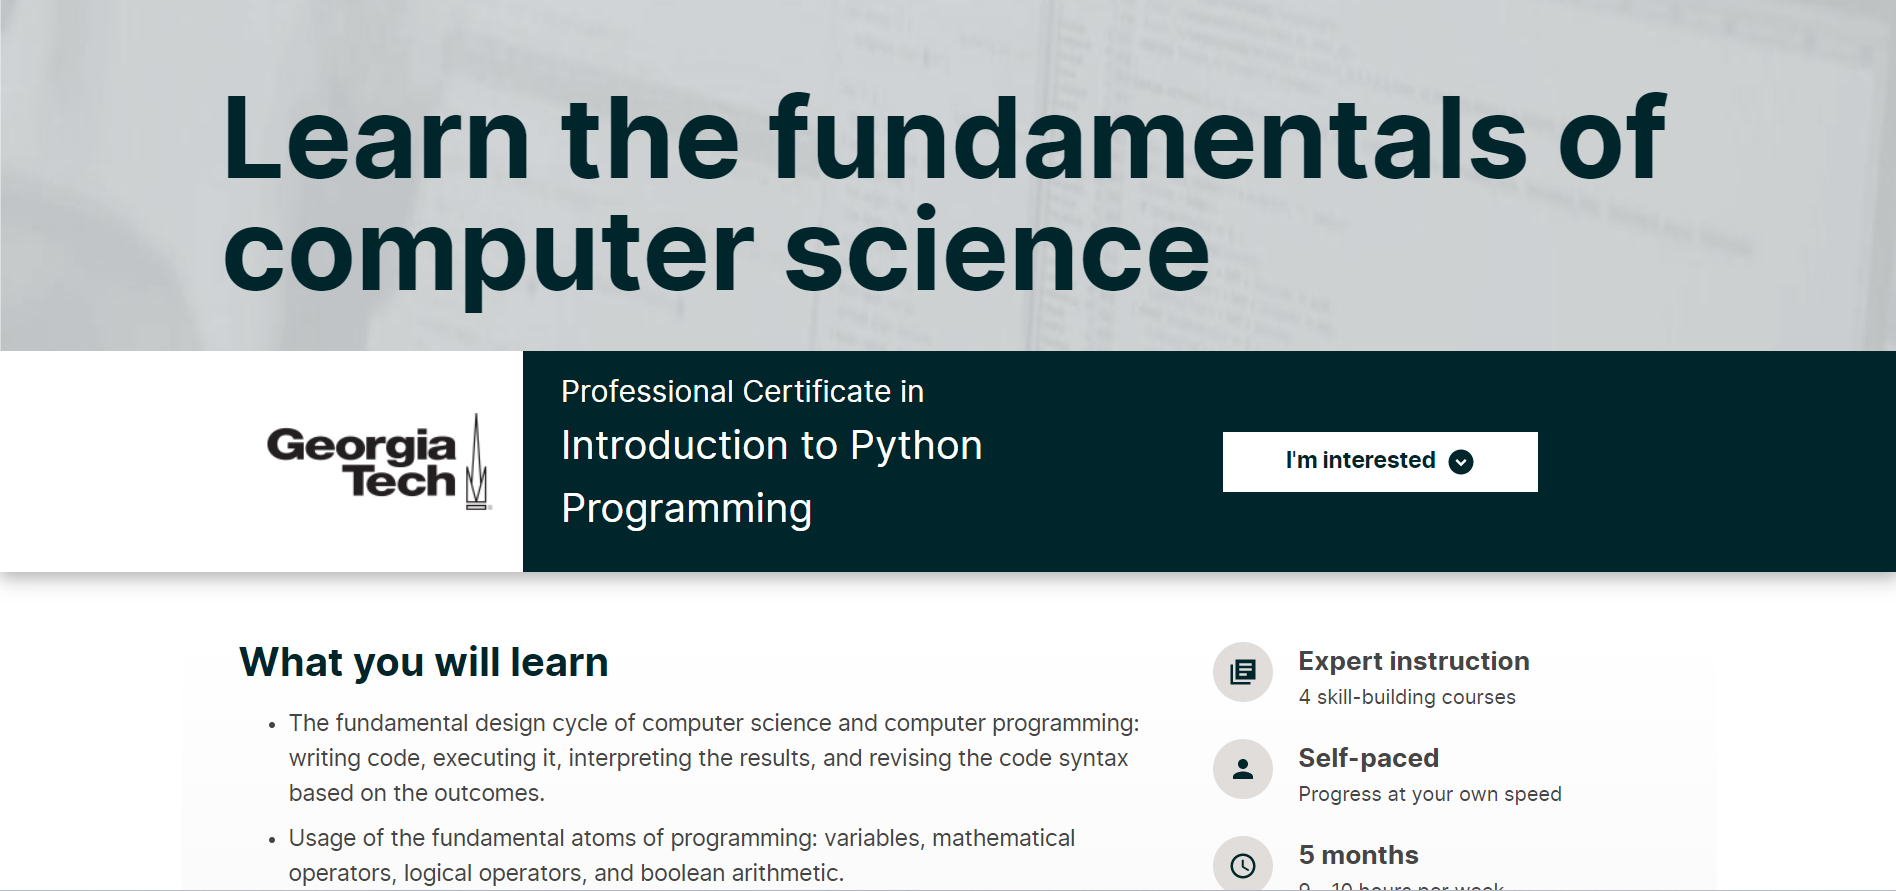 Professional Certificate in Introduction to Python Programming